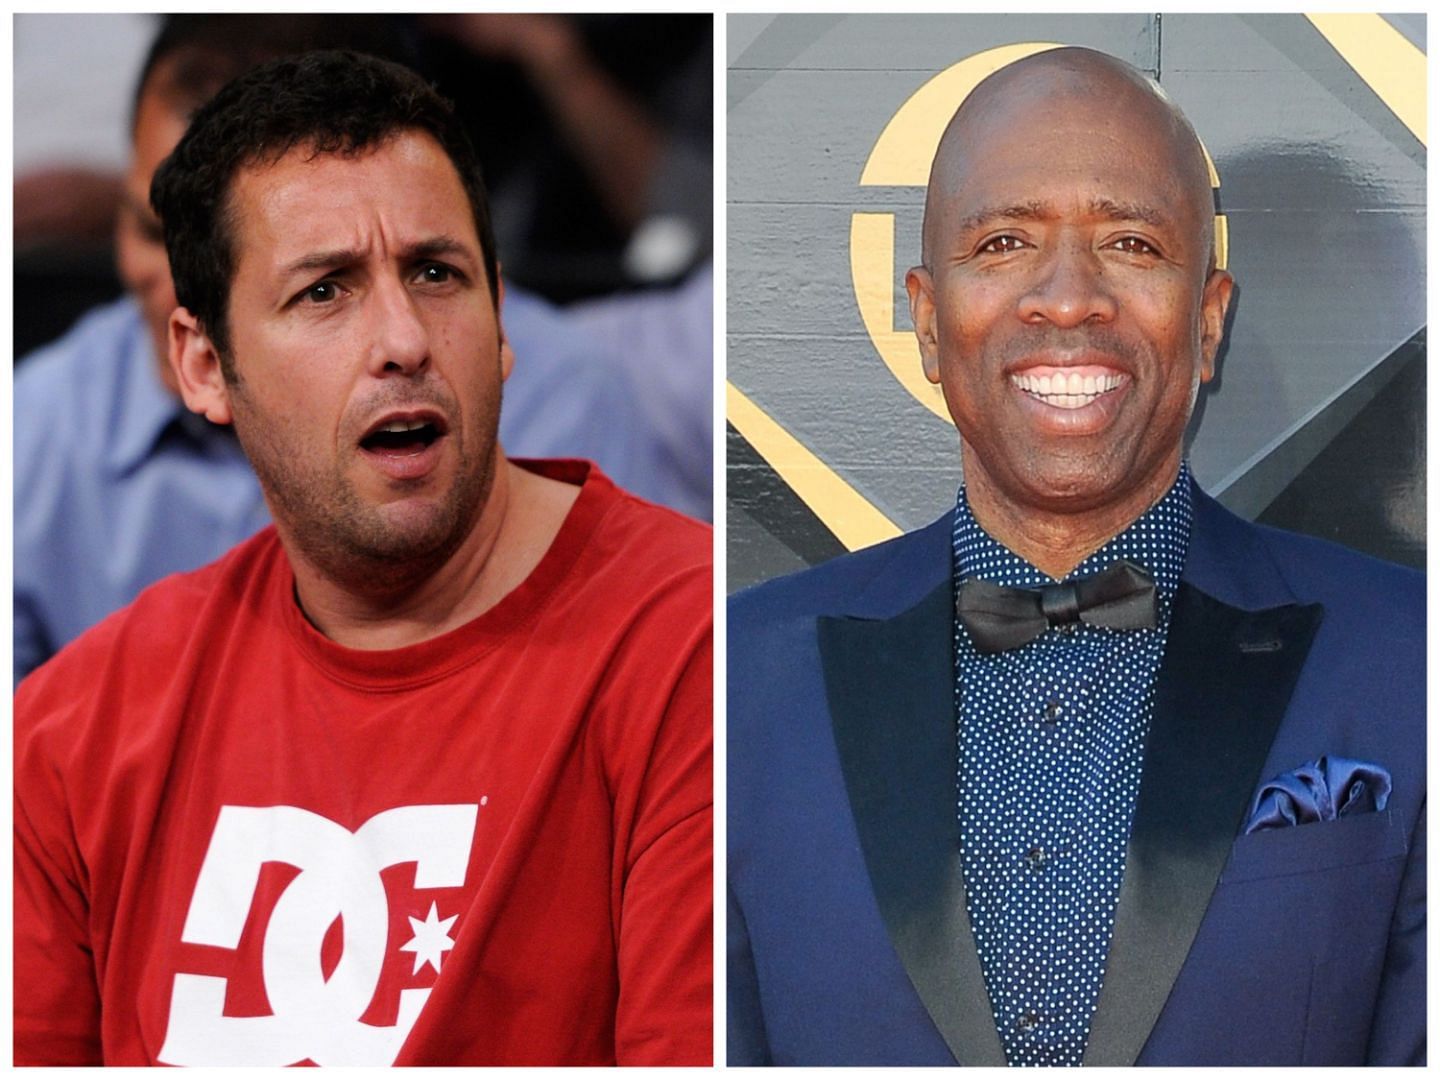 Adam Sandler and Kenny Smith